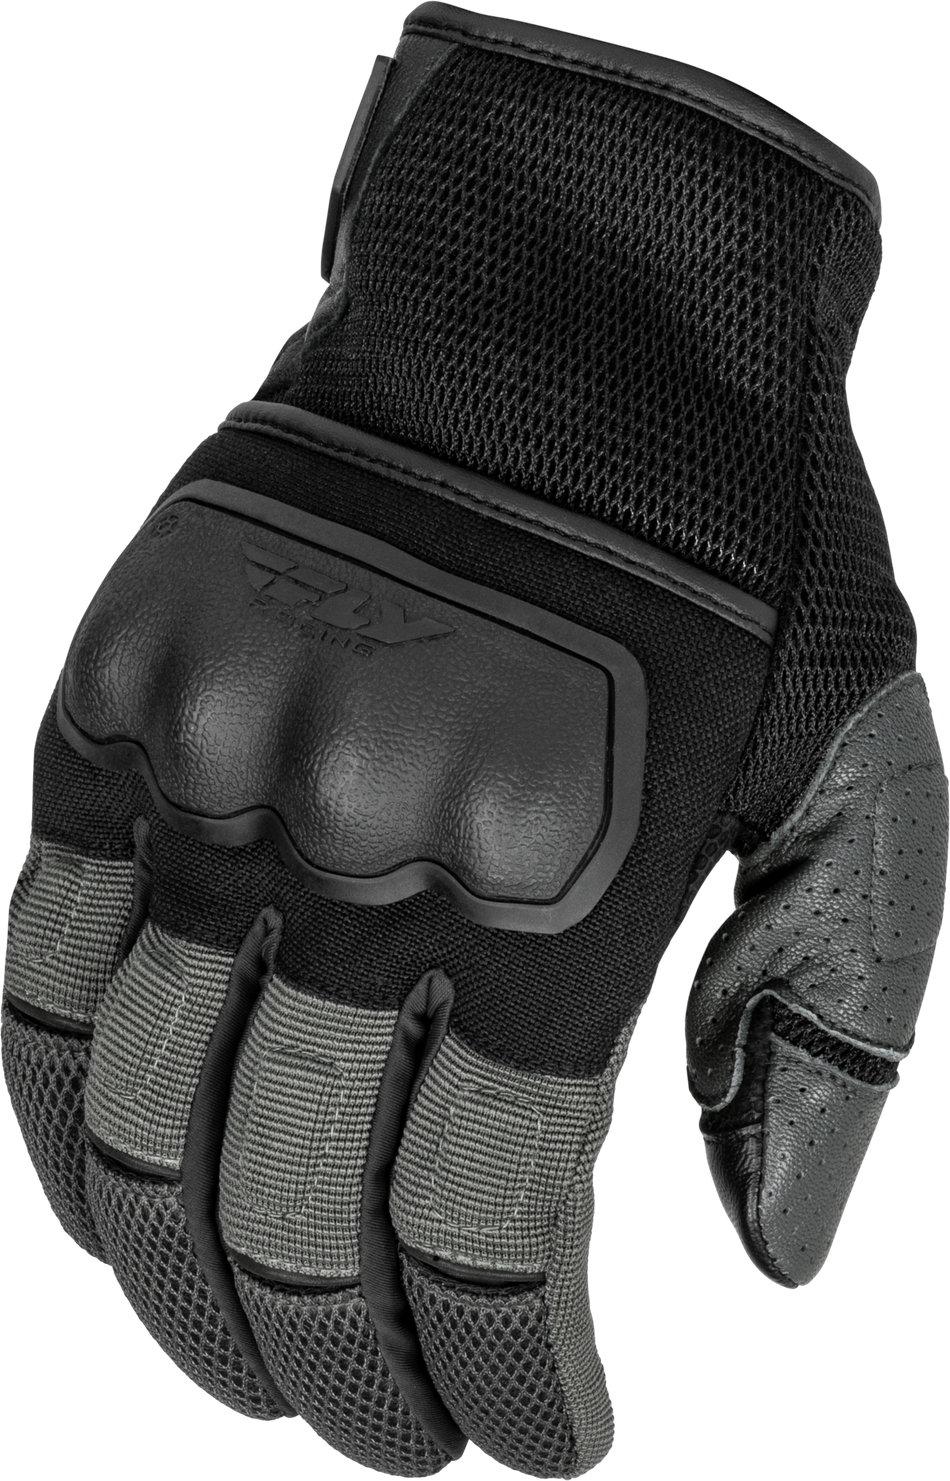 FLY RACING Coolpro Force Gloves Black/Grey Md 476-4126M